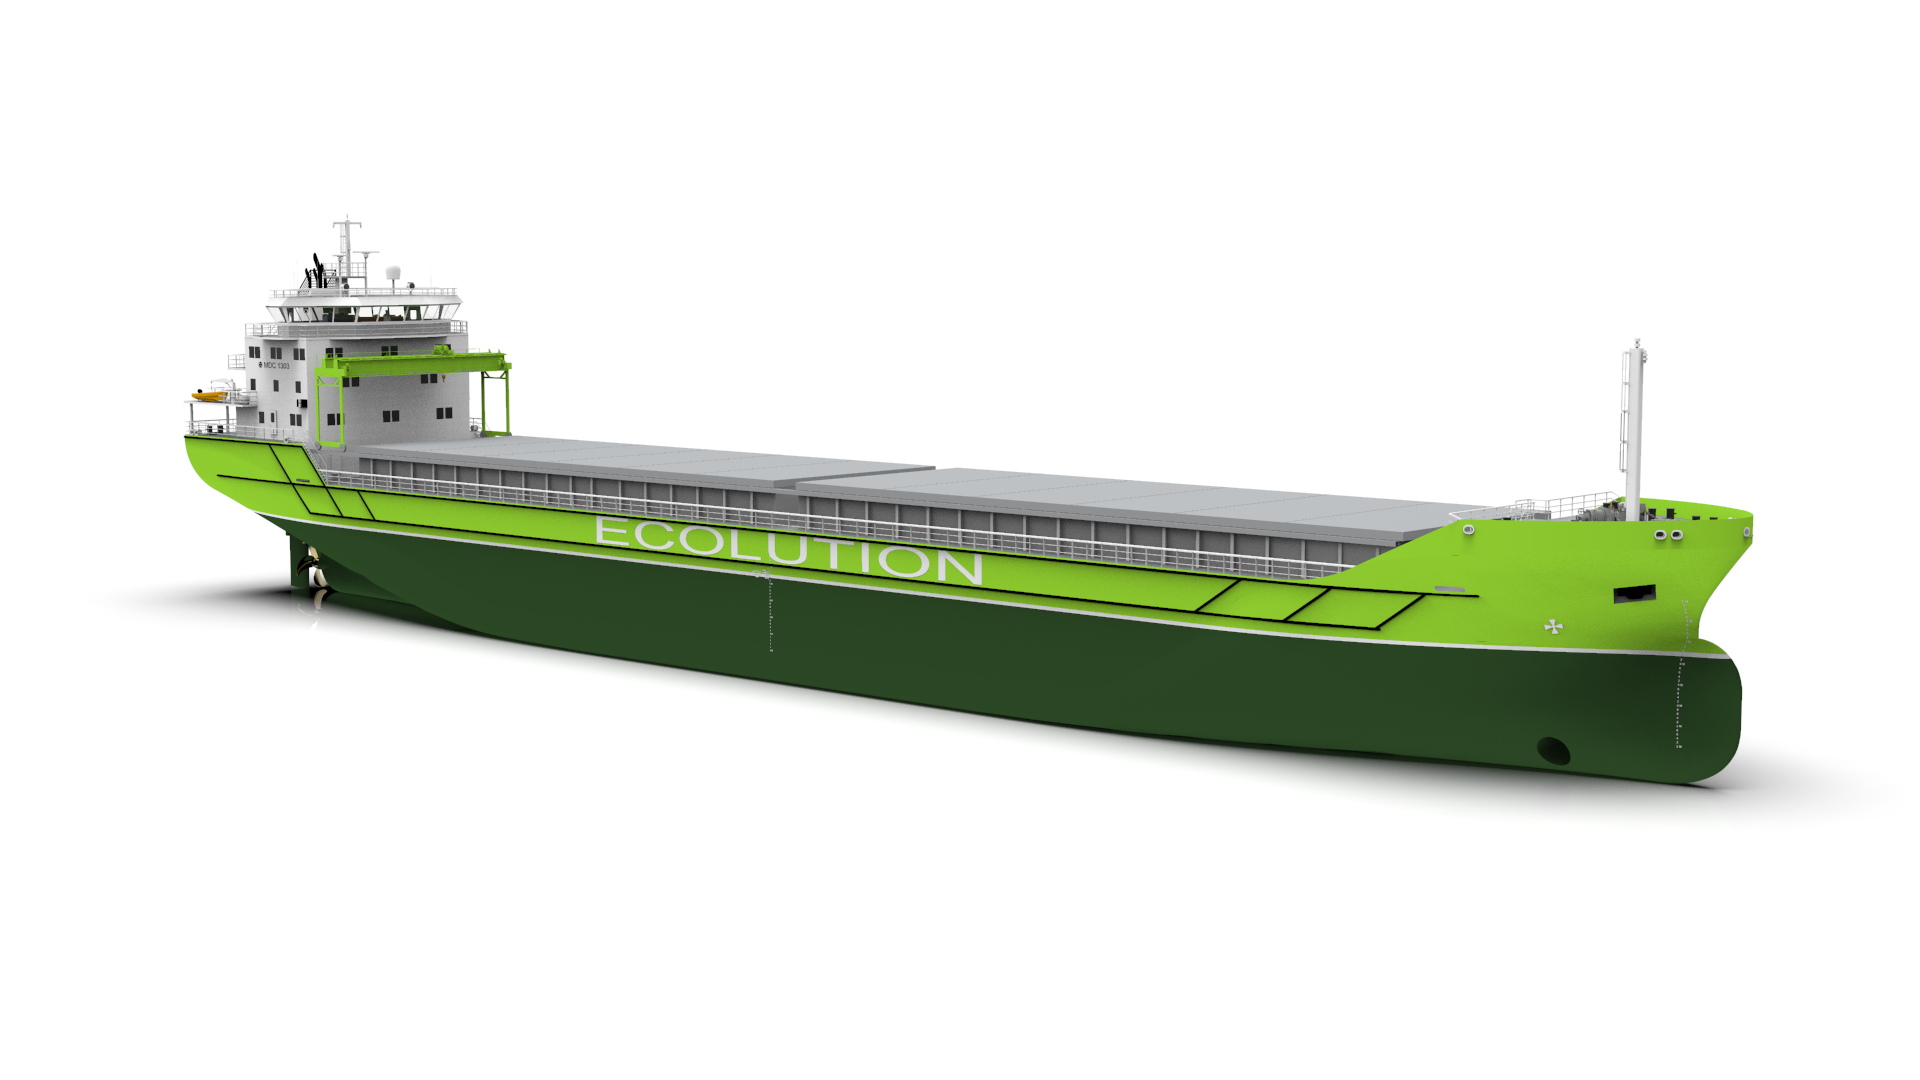 MDC 1303 ECOLUTION type General Cargo Carrier, 8000 dwt - Contracted